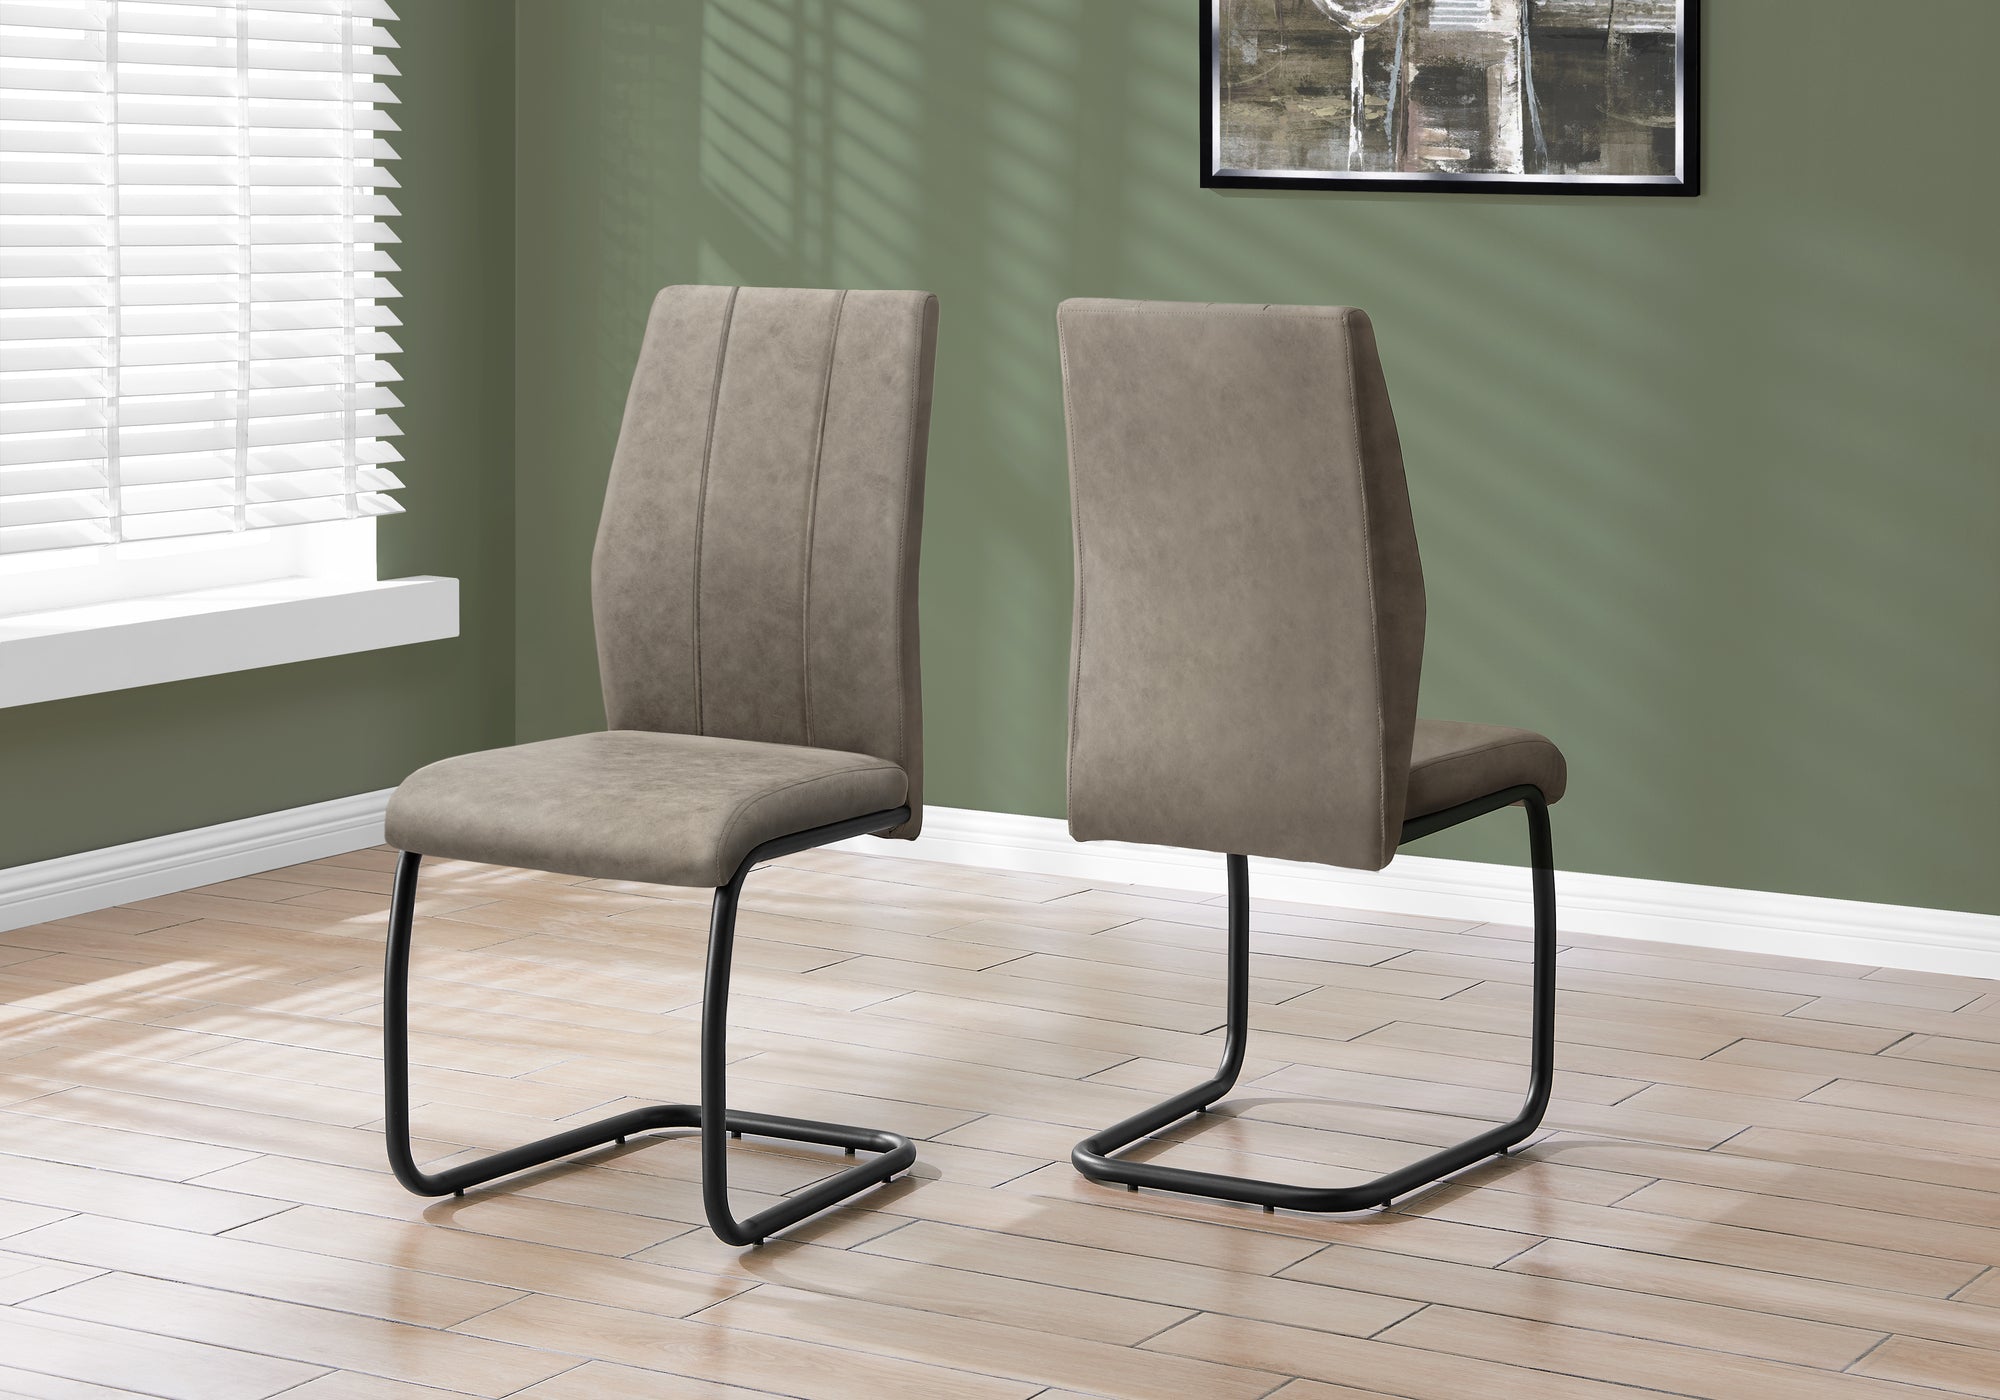 Muscat Fabric 39"H Dining Chair (Set of 2 - Taupe)